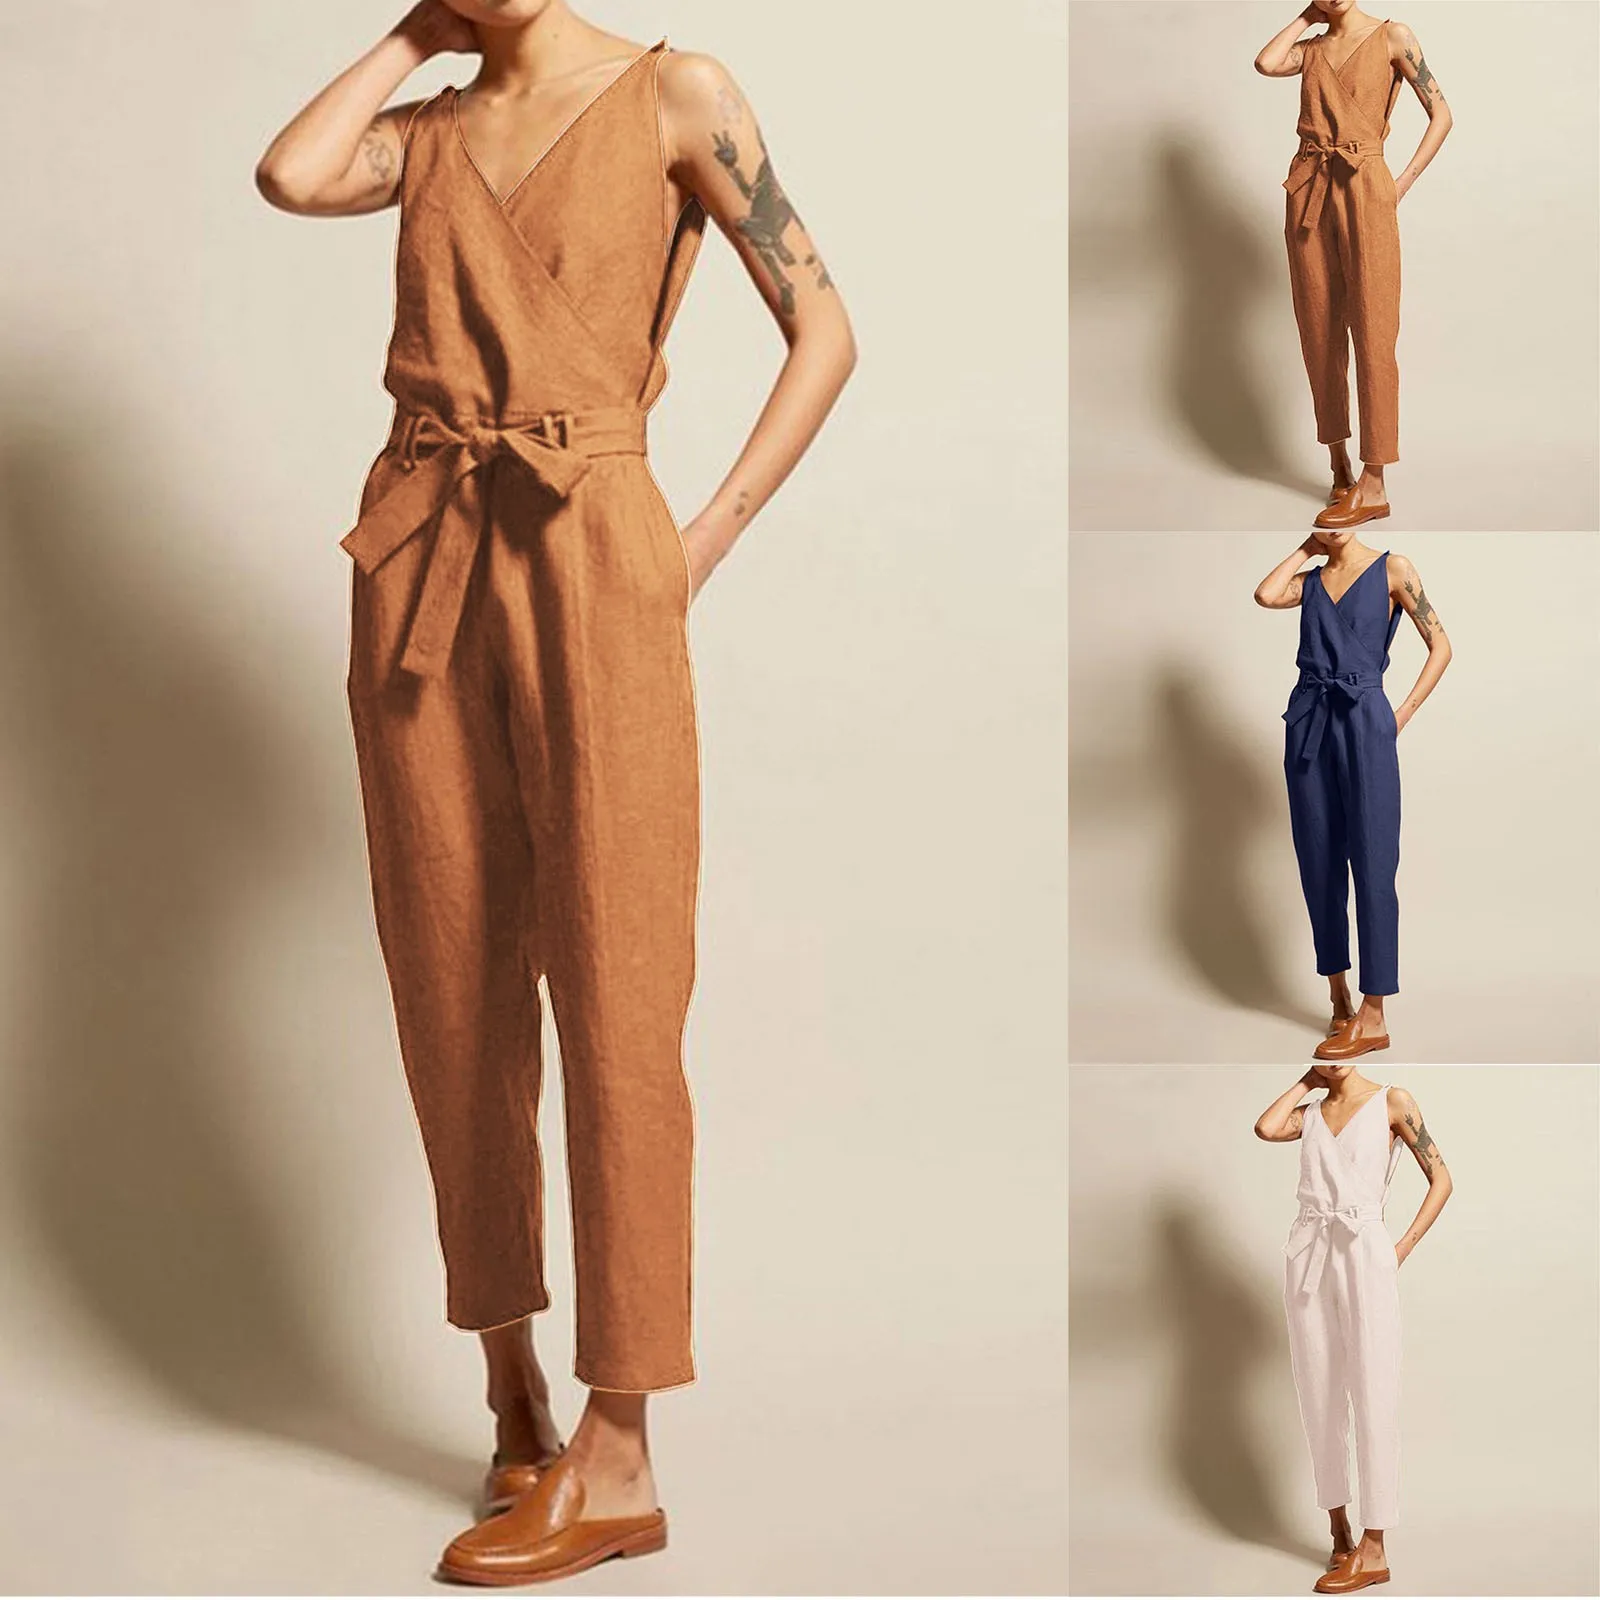 

Women Jumpsuits Summer Vintage Romper Casual Sleeveless Playsuits Popular Bodysuits Belted Juniors Jumpsuits Dressy